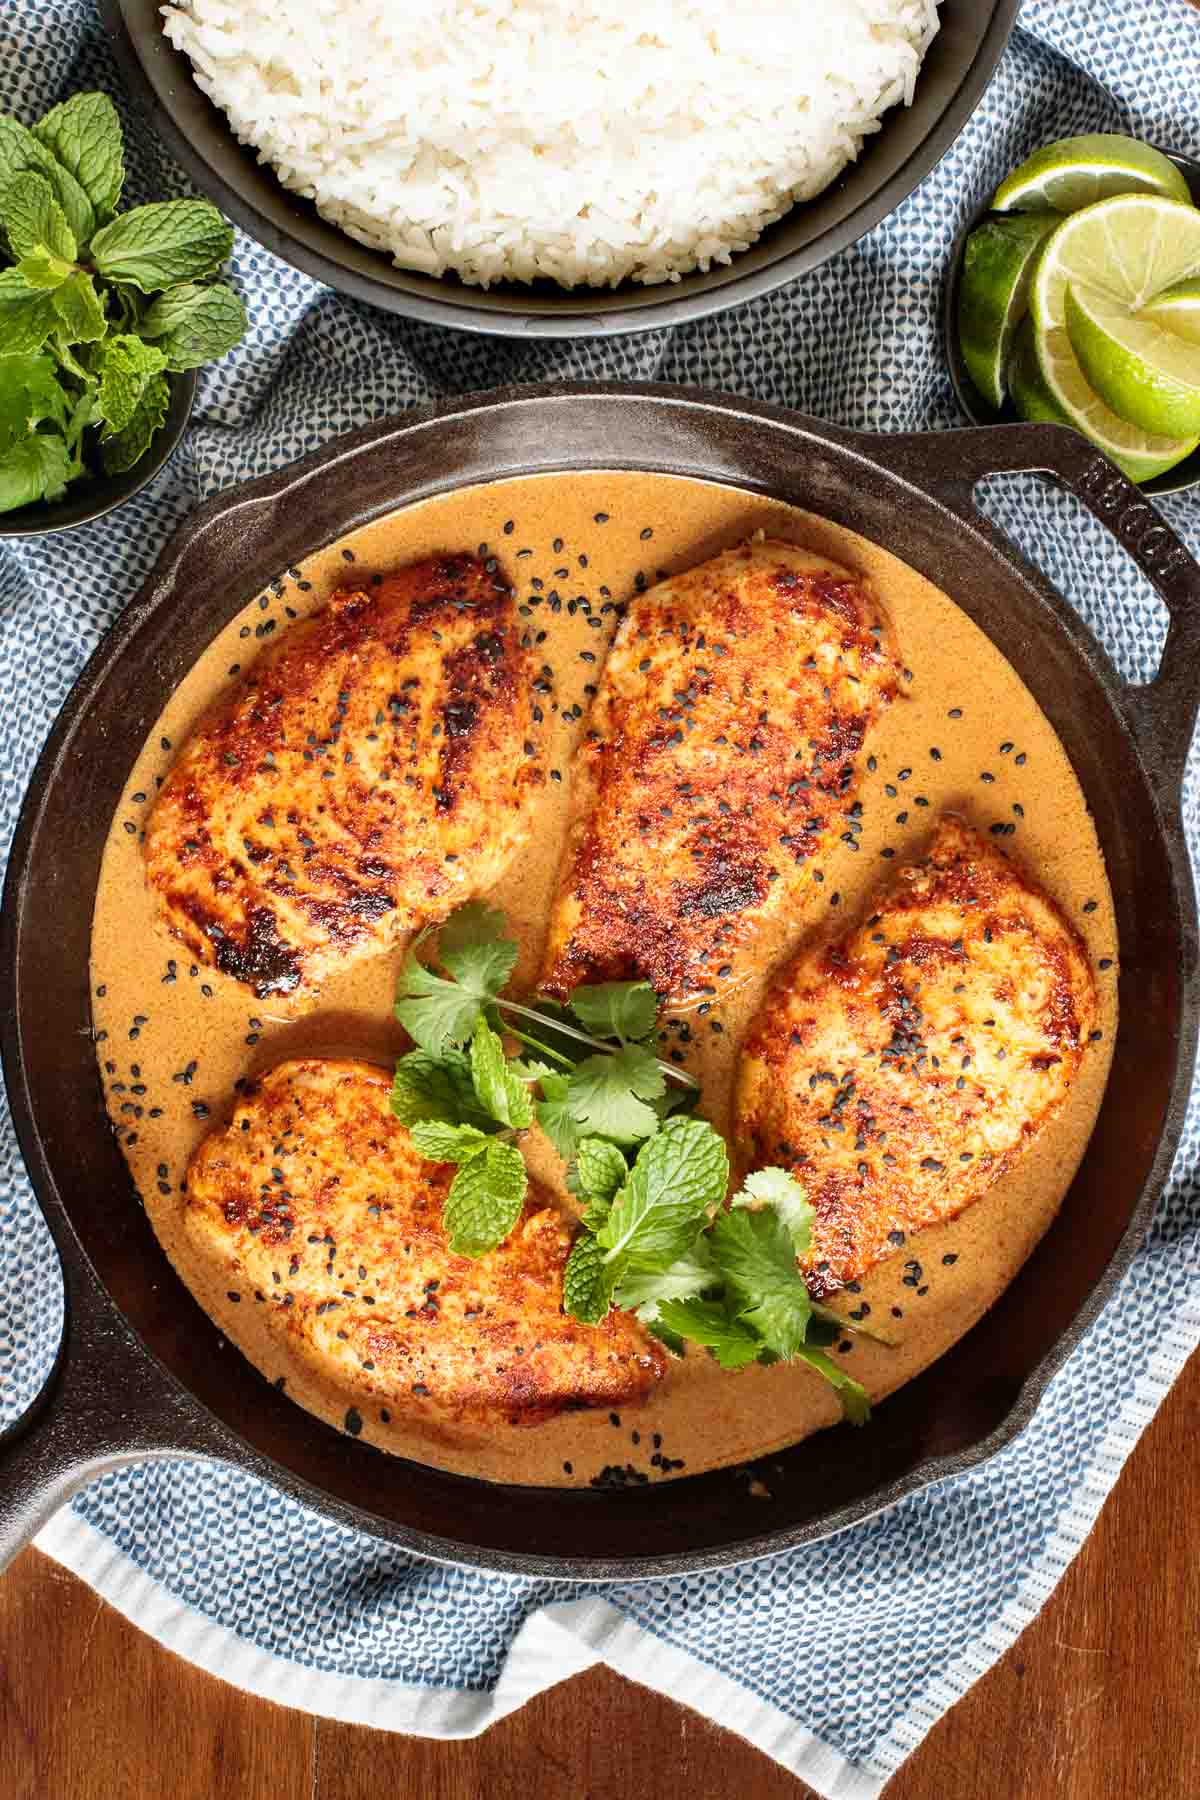 Overhead vertical photo of Coconut Braised Chicken Breasts in a cast iron skillet on a blue and white patterned kitchen towel.